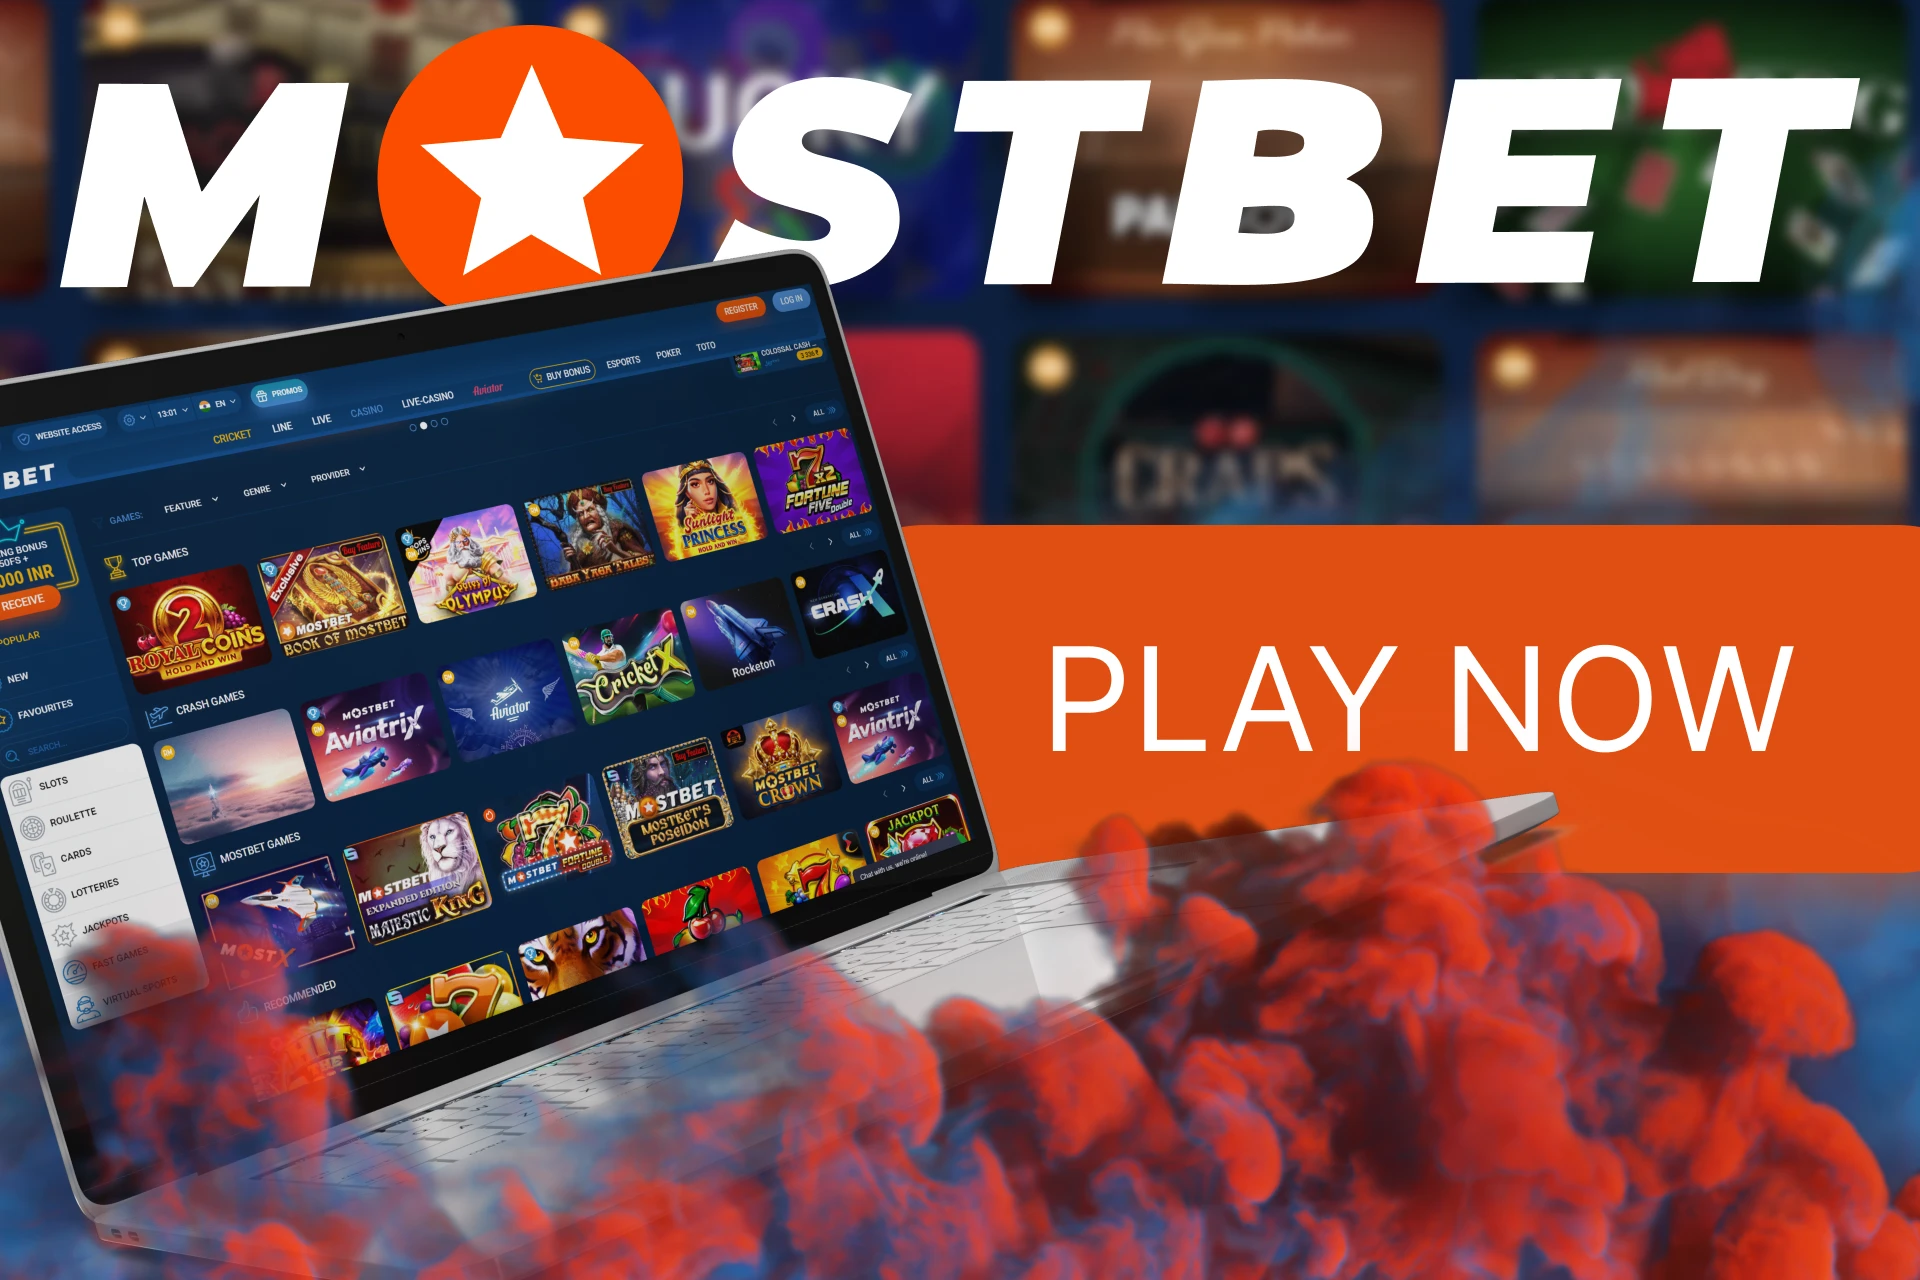 Play the best casino games at Mostbet.